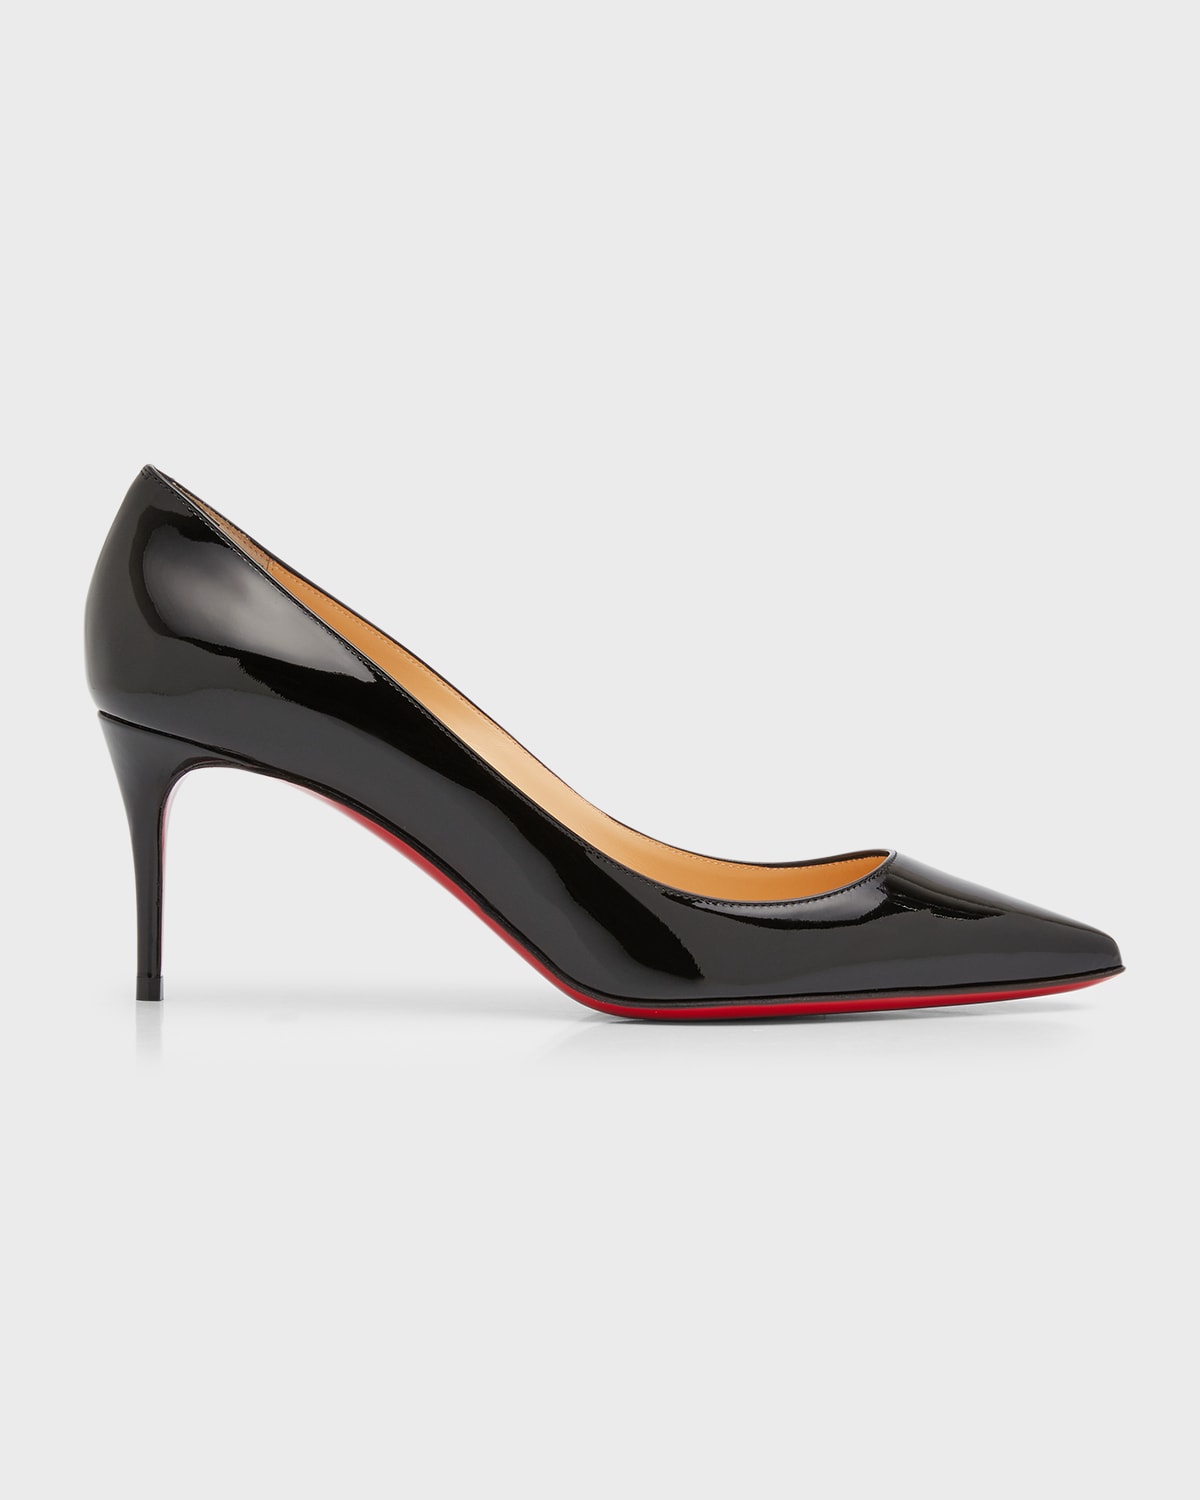 Christian Louboutin Kate 70mm Patent Red Sole Pumps In Black